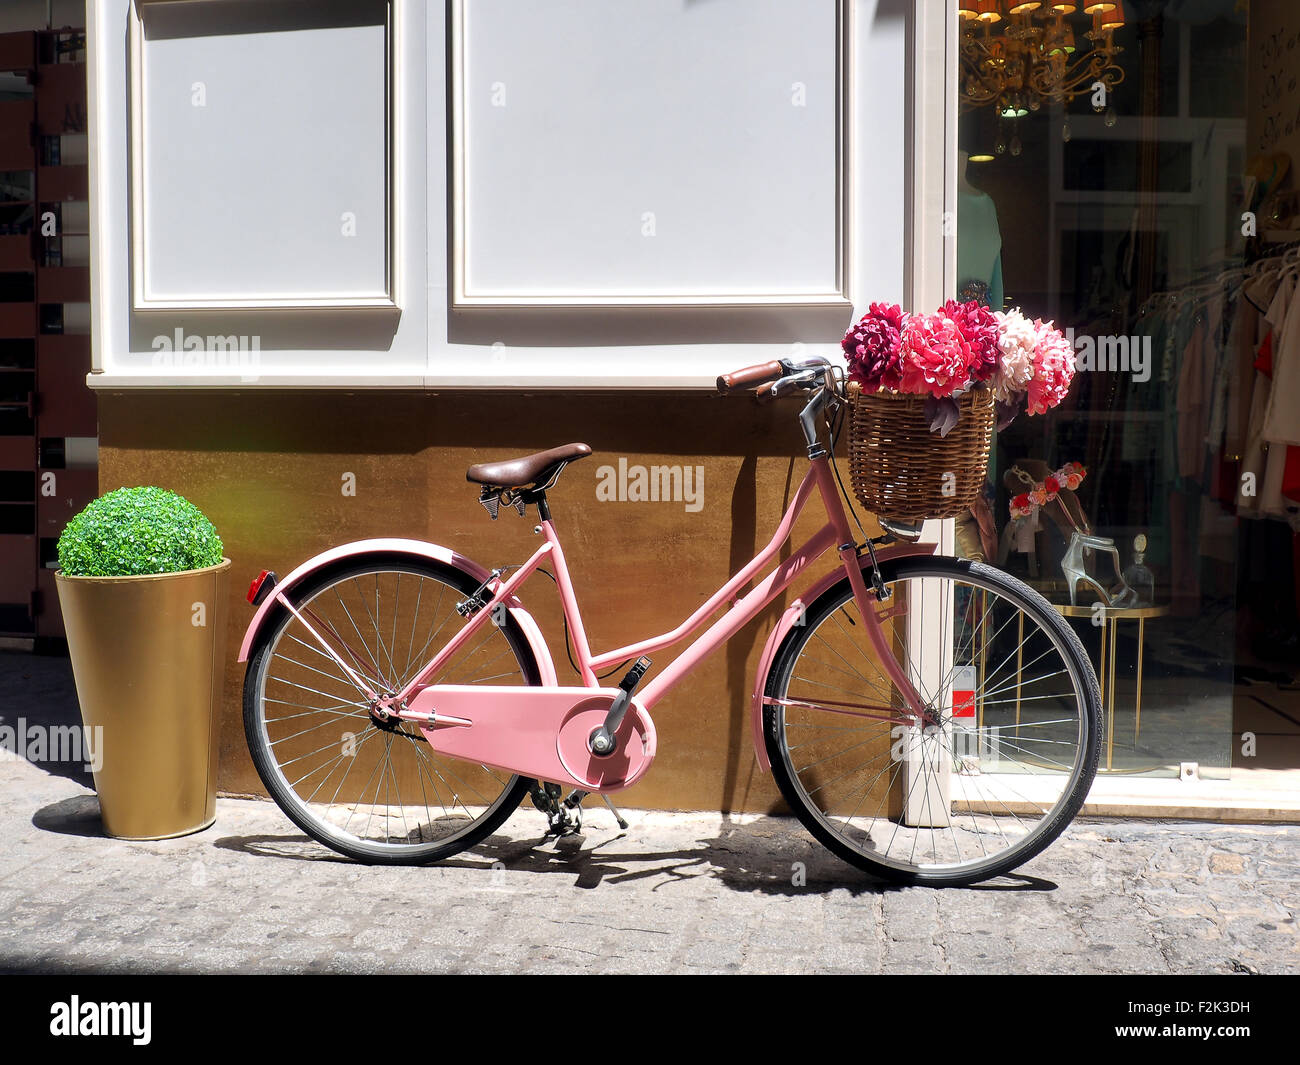 This vintage pink girls bicycle has beautiful pink flowers in a basket on the front of the bike Stock Photo